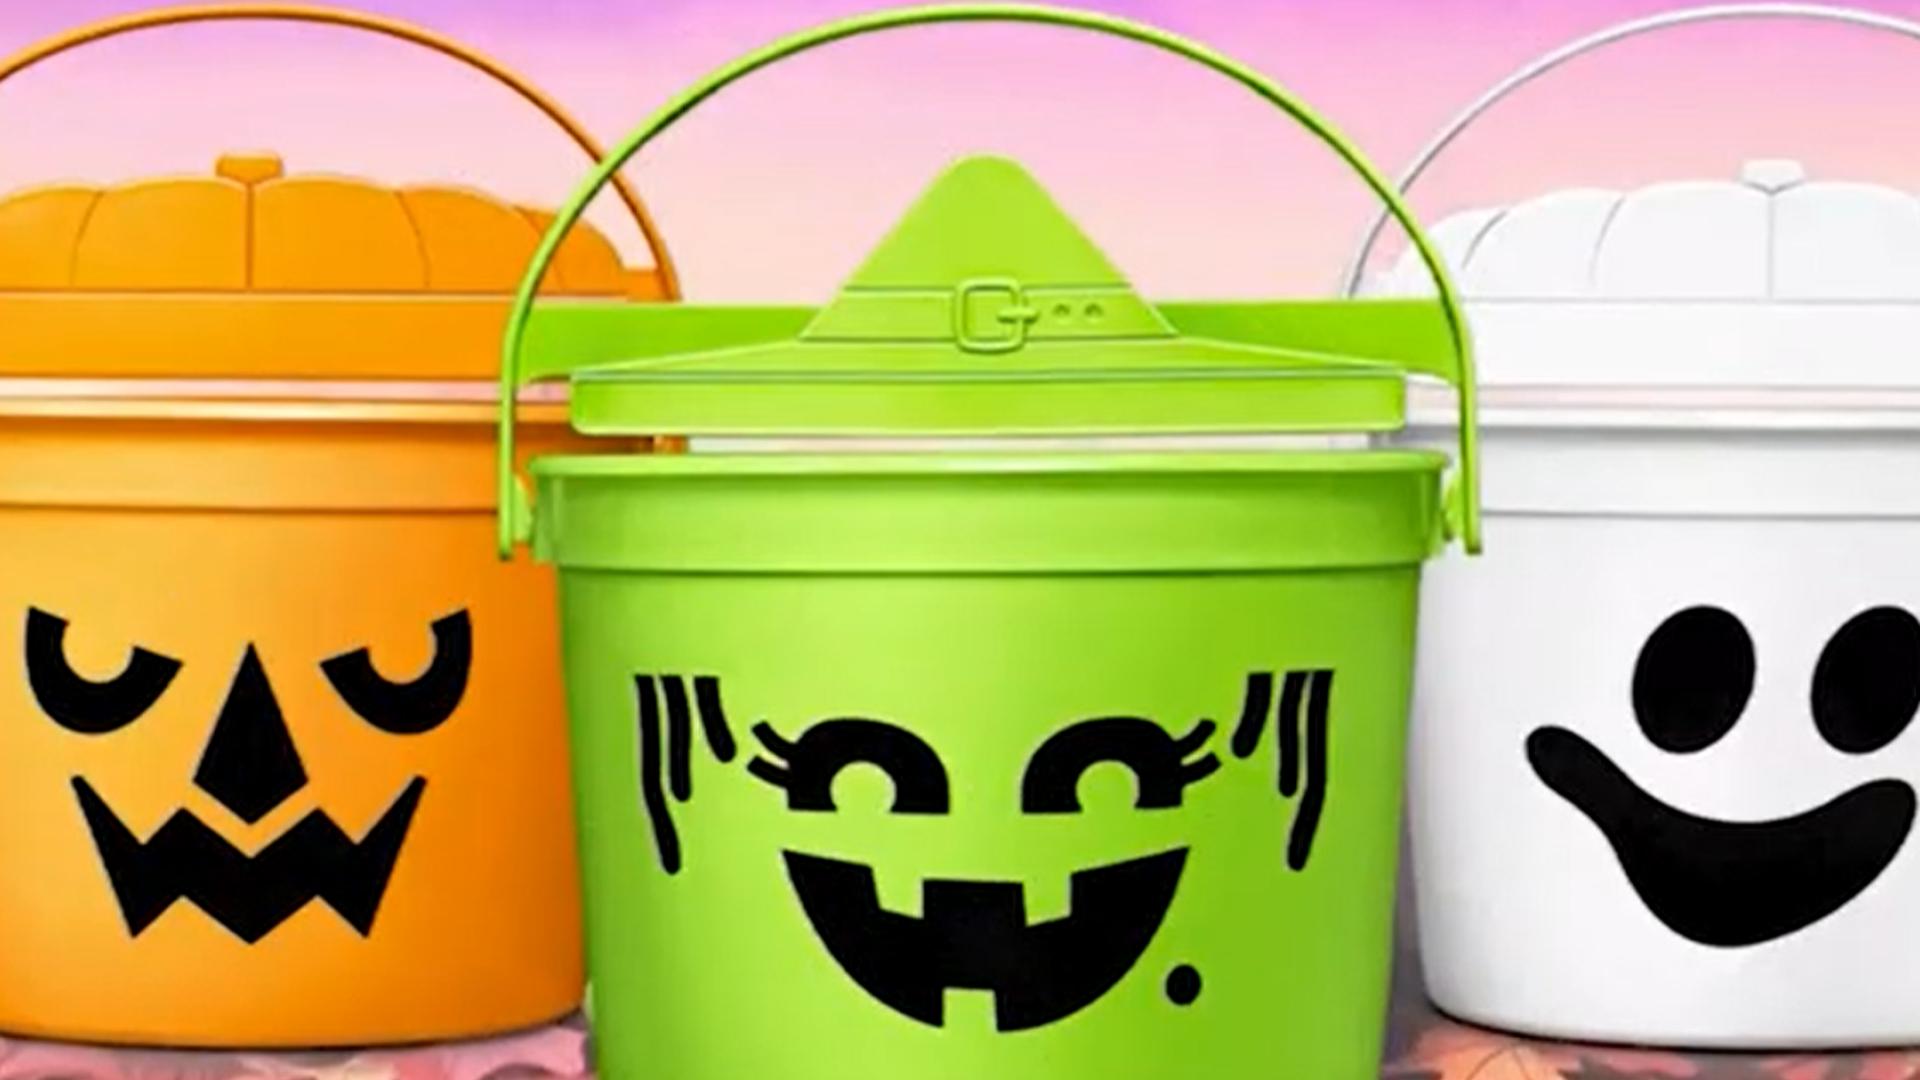 McDonald's Happy Meal Halloween pail returns WNKY News 40 Television